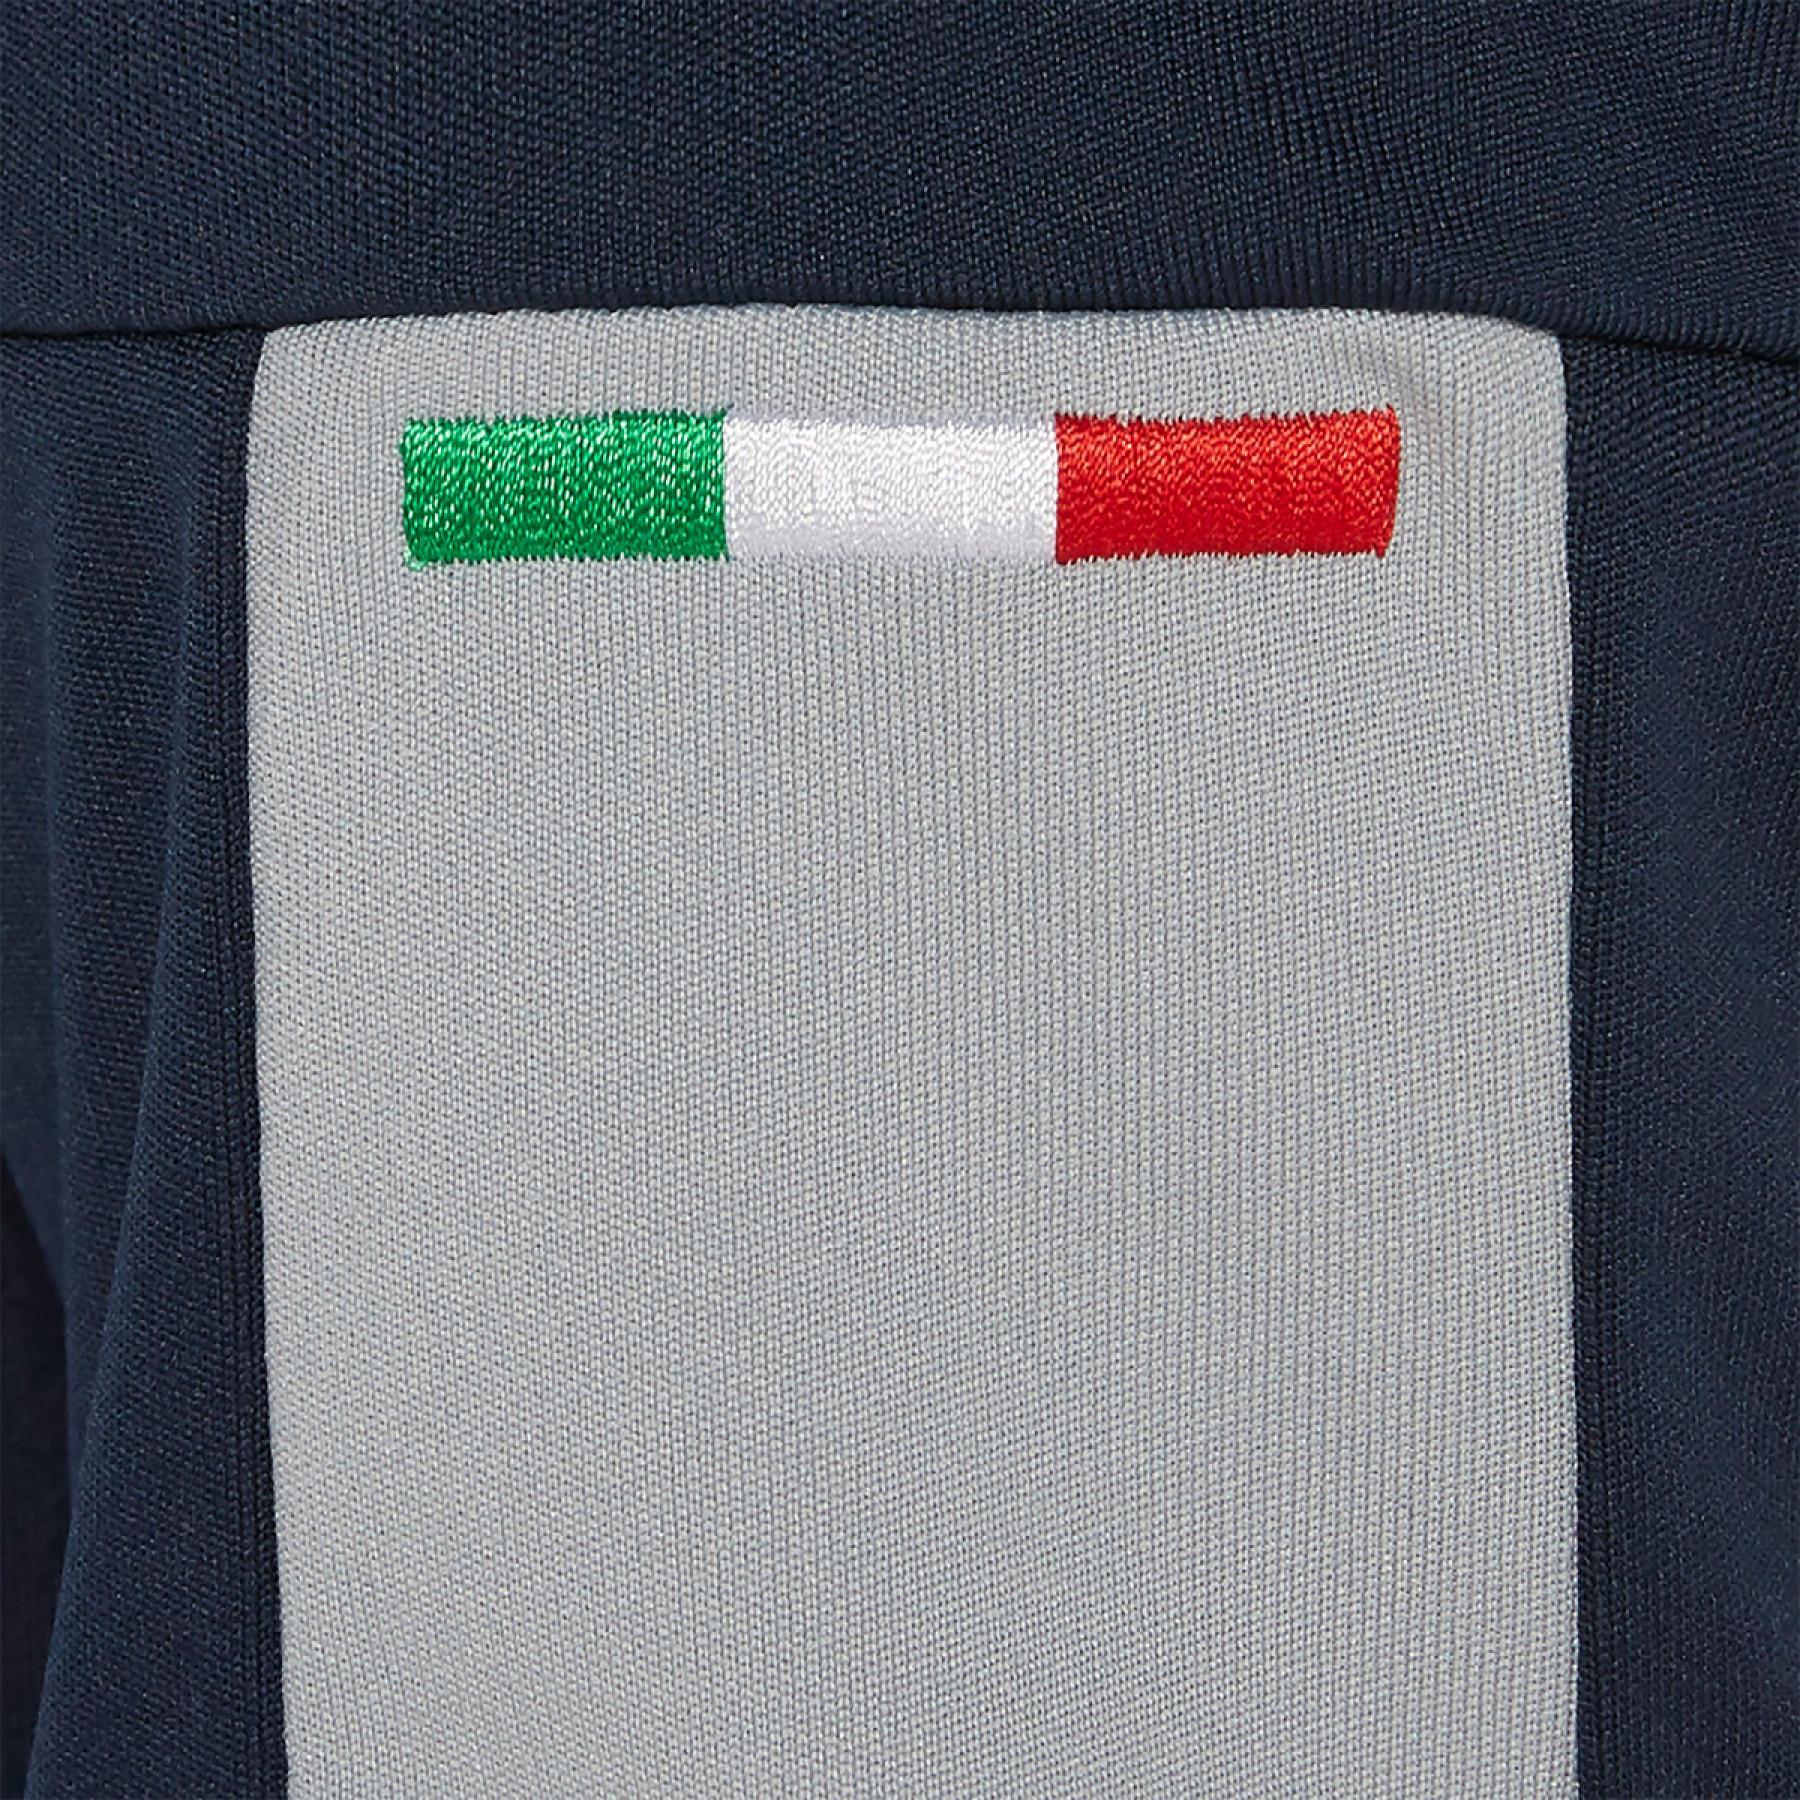 Staff T-shirt Italie rugby 2019